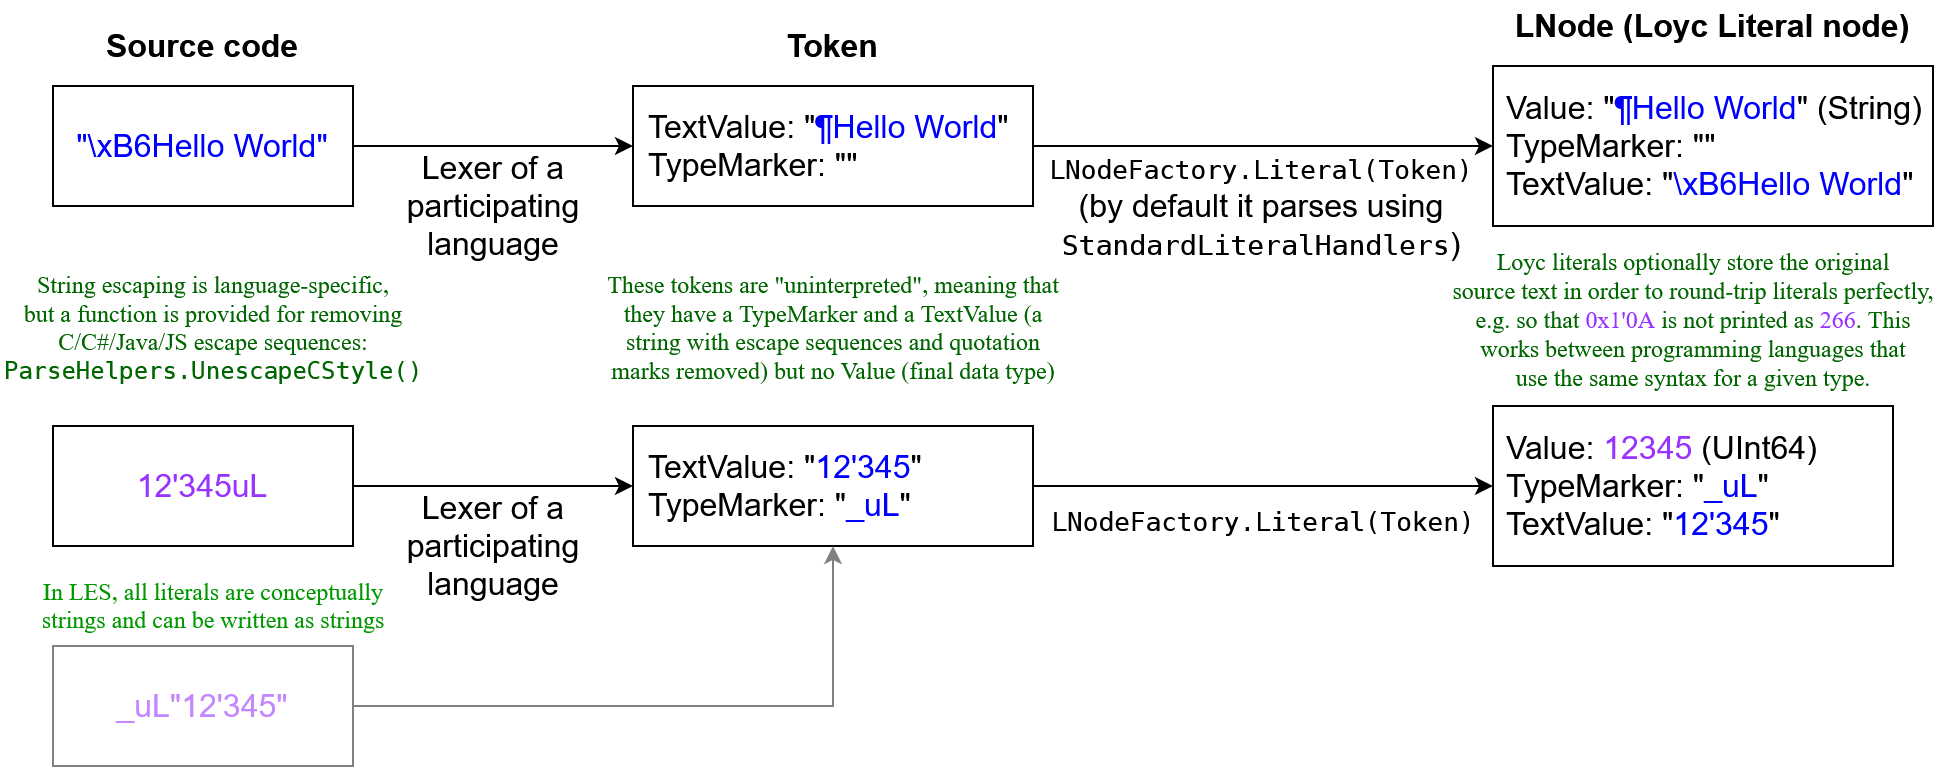 A diagram showing how a lexer converts source code to tokens, which have a text value and type marker, which is later converted to a Loyc literal node which has a value, text value, and type marker